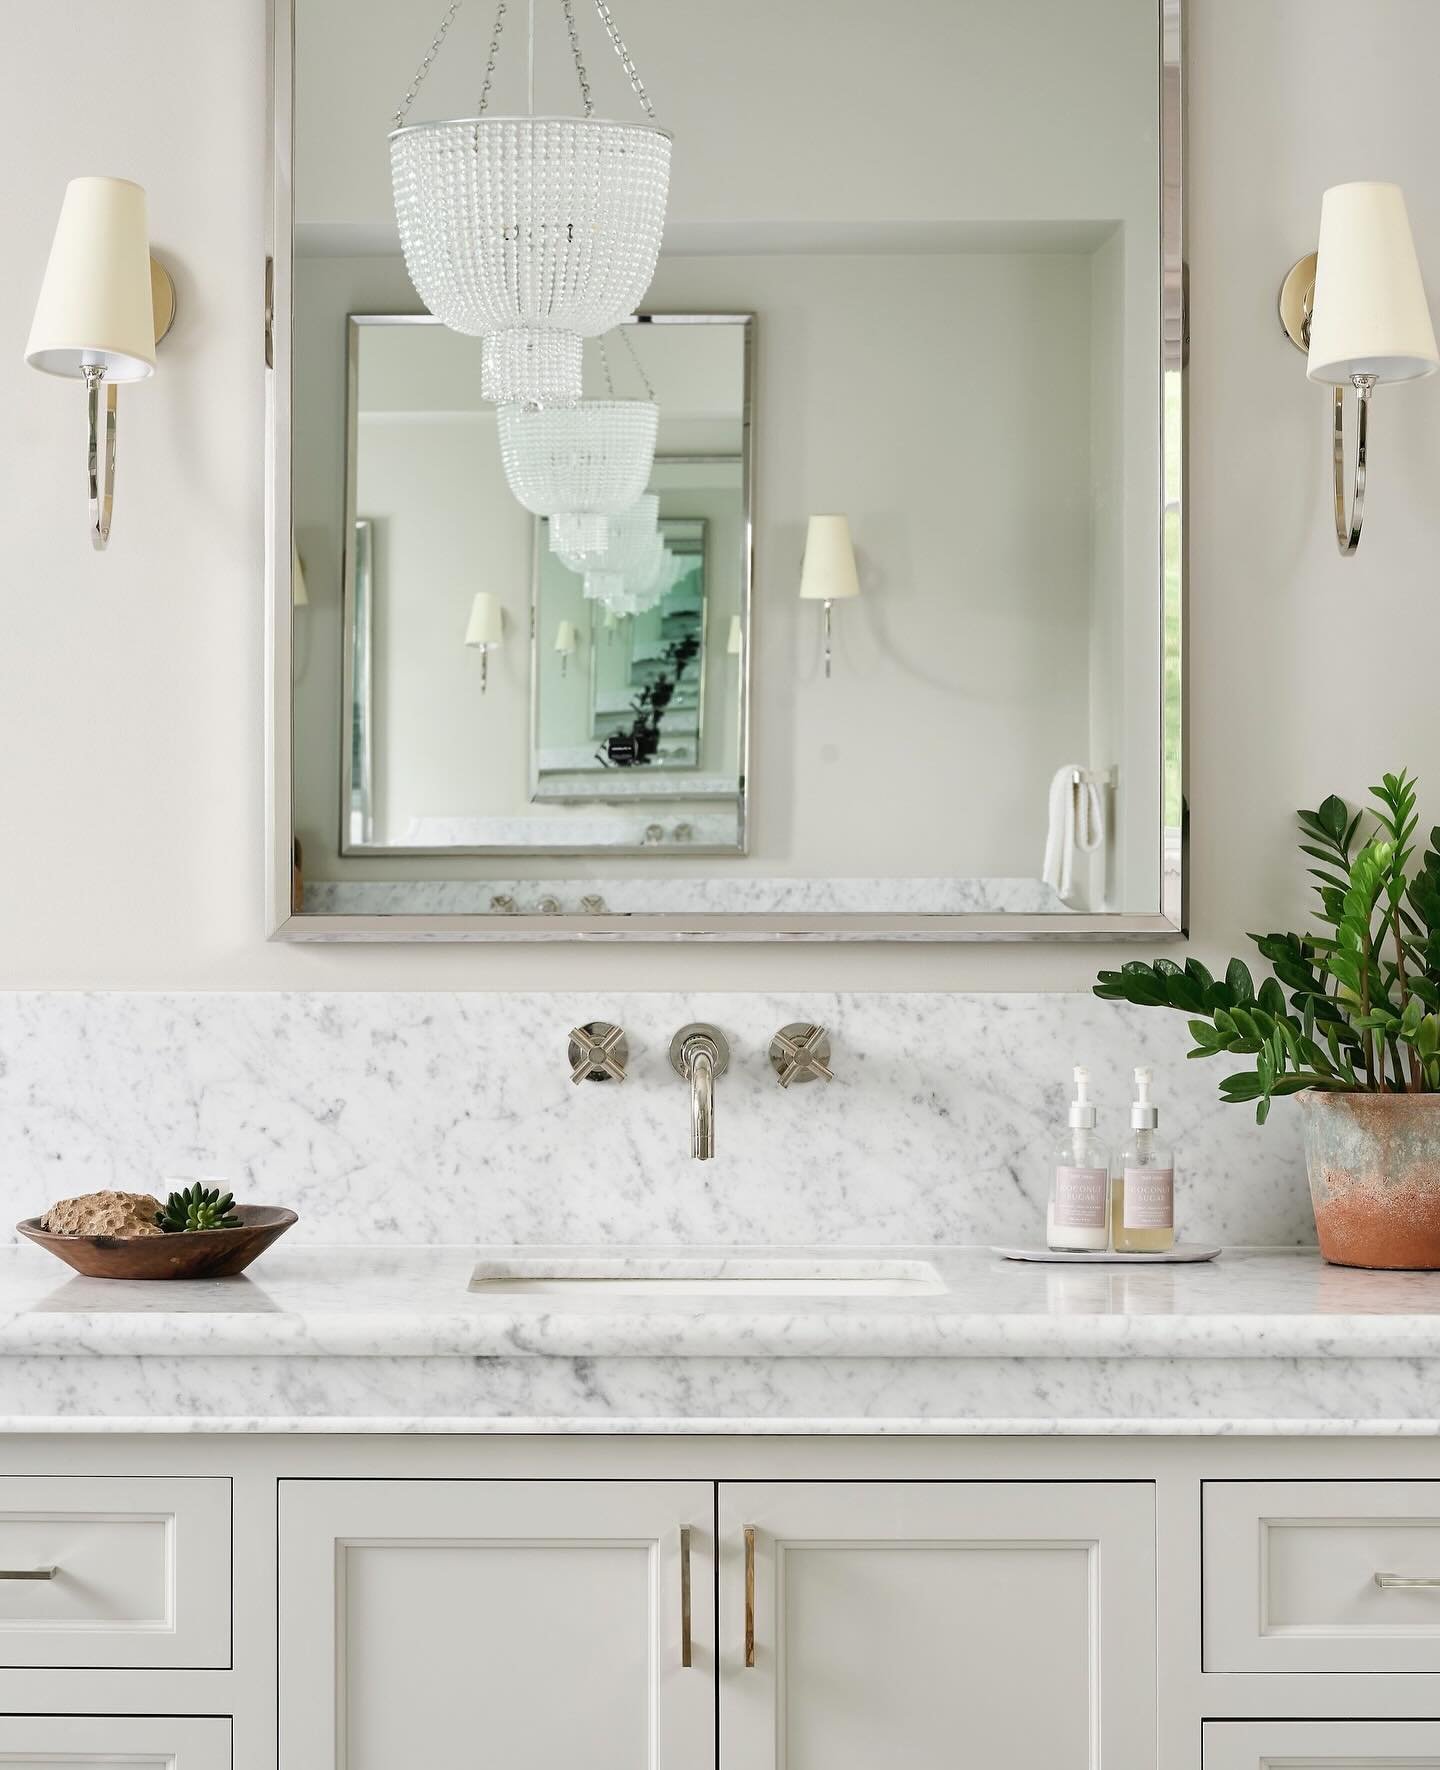 At #LGDCamelbackBuild we continued the new traditional aesthetic into the primary bath where we chose natural marble and classic finishes to complement the client sourced chandelier✨ 

Build &amp; Styling // @lexigracedesign 
Lead Designer // Lexi Lu